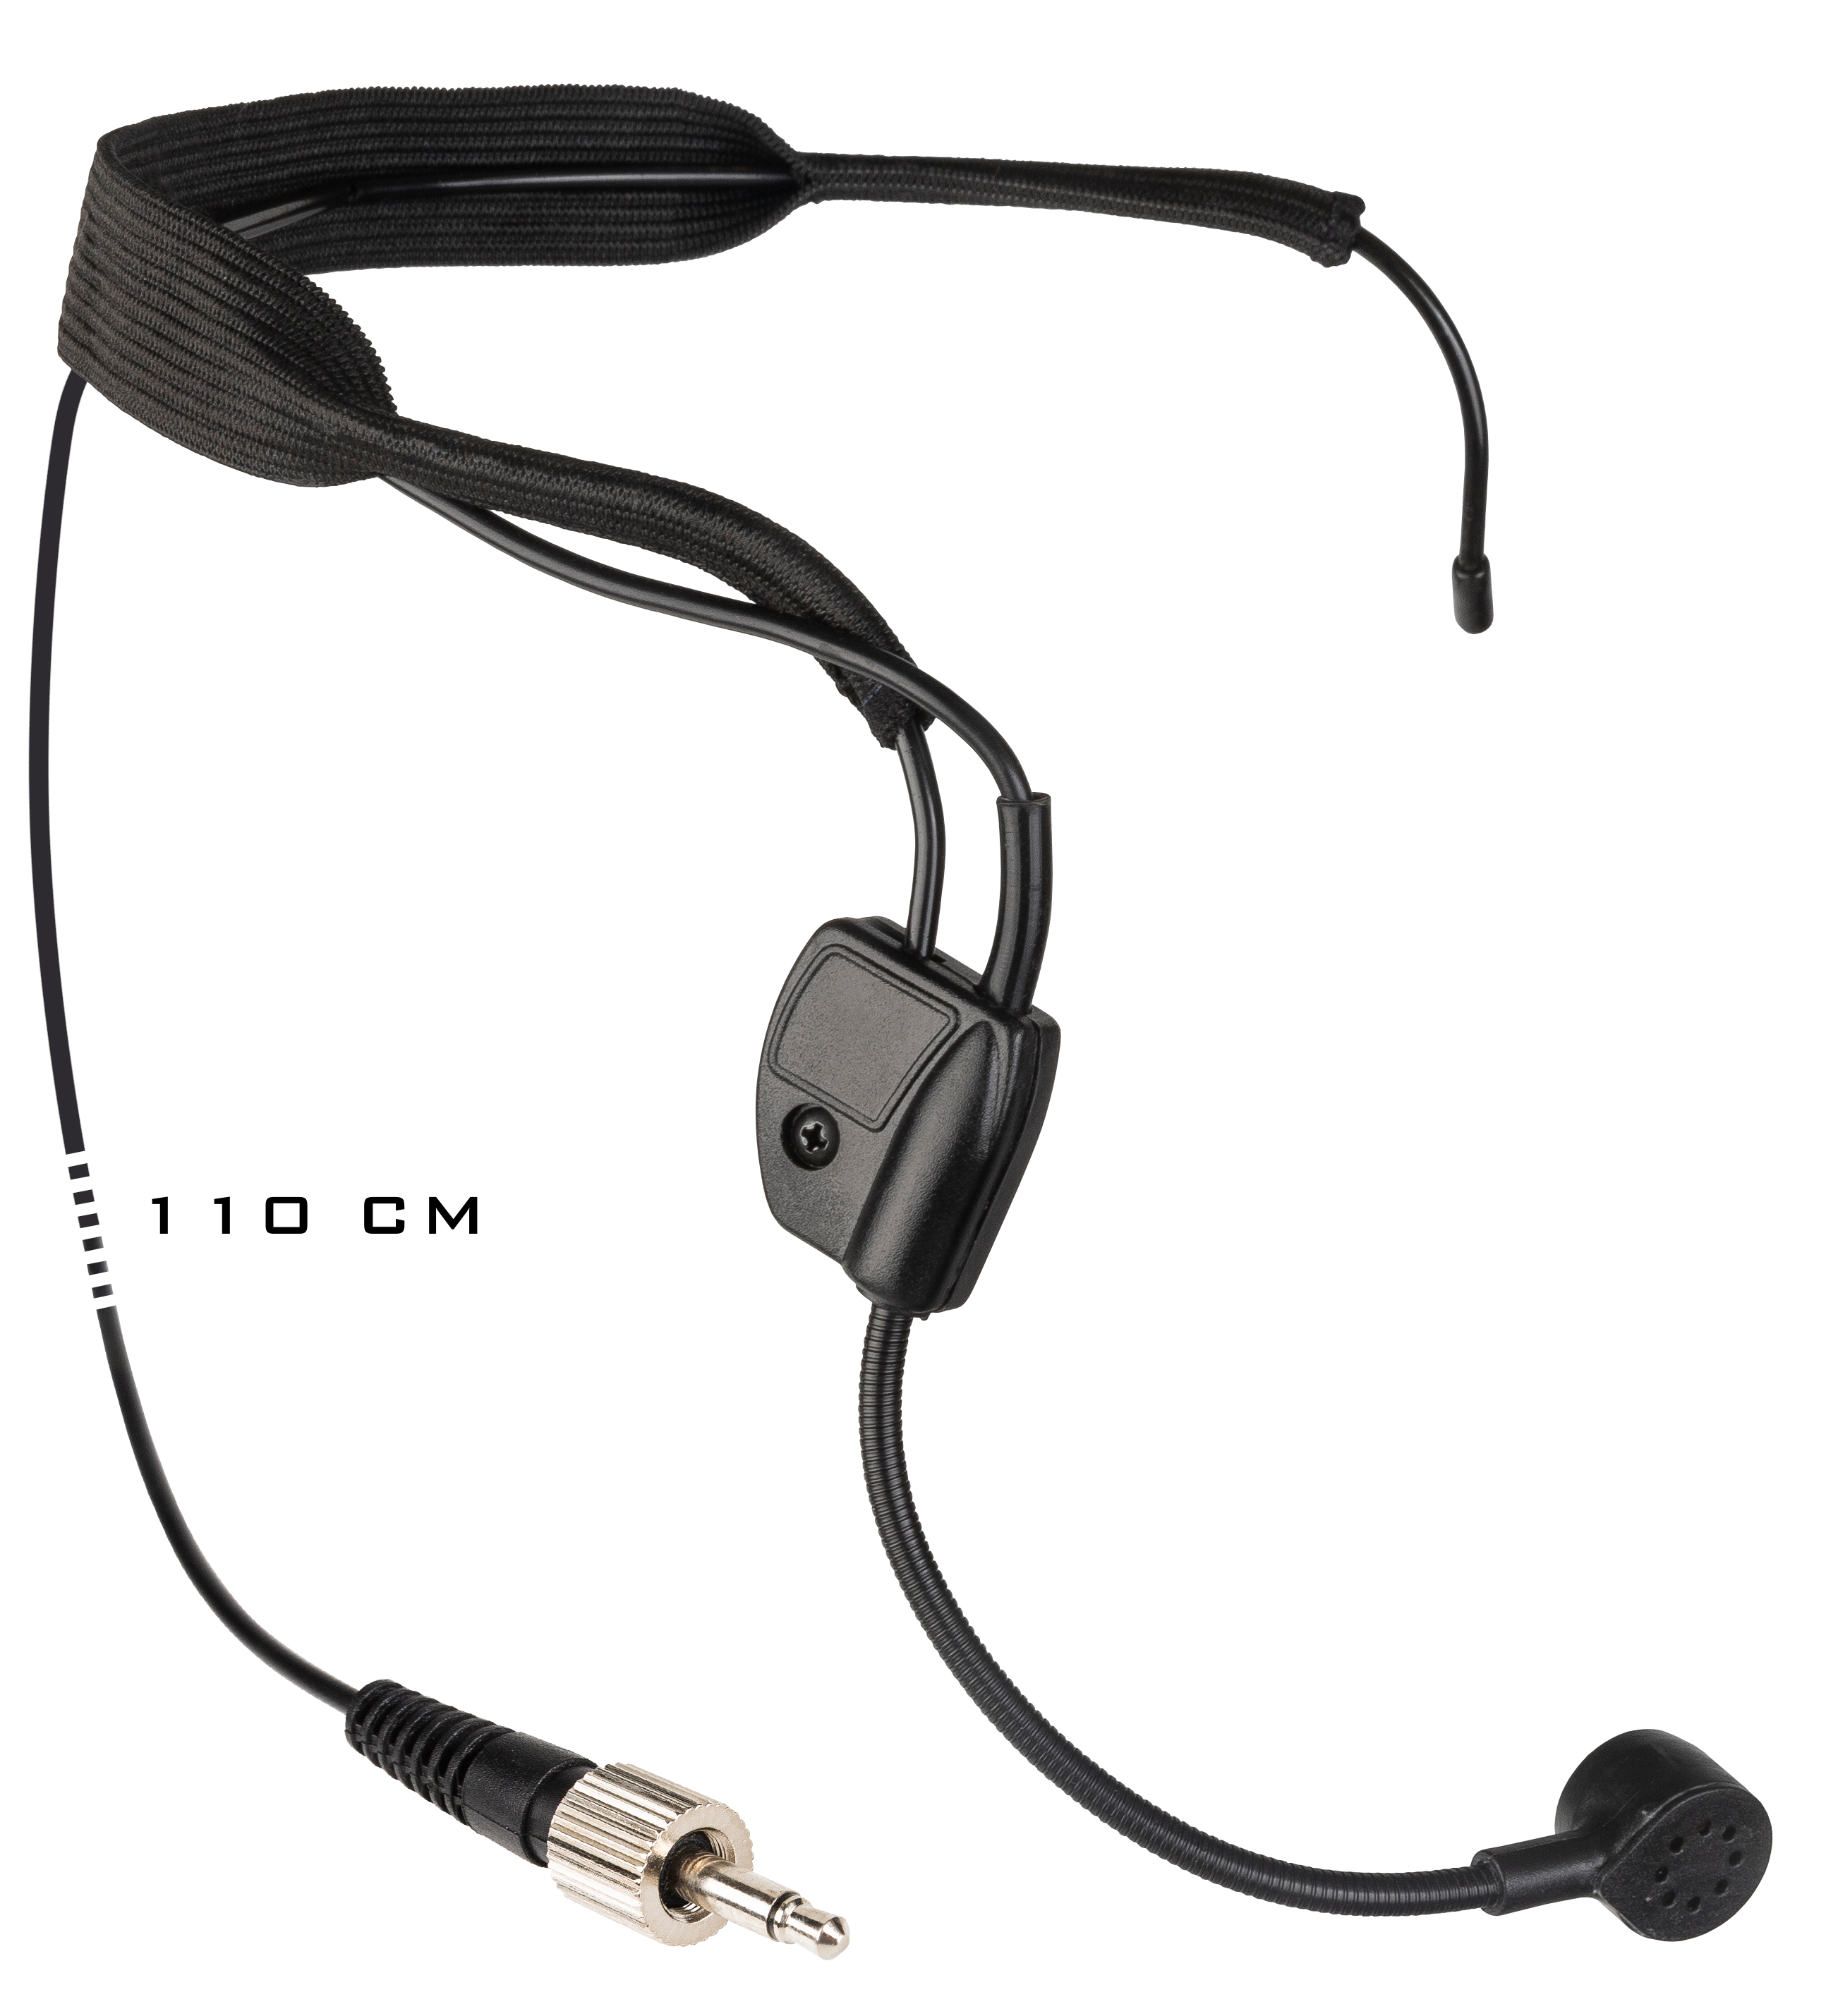 Very robust headset condenser microphone with lockable mini-jack for use with the HF-BPACK